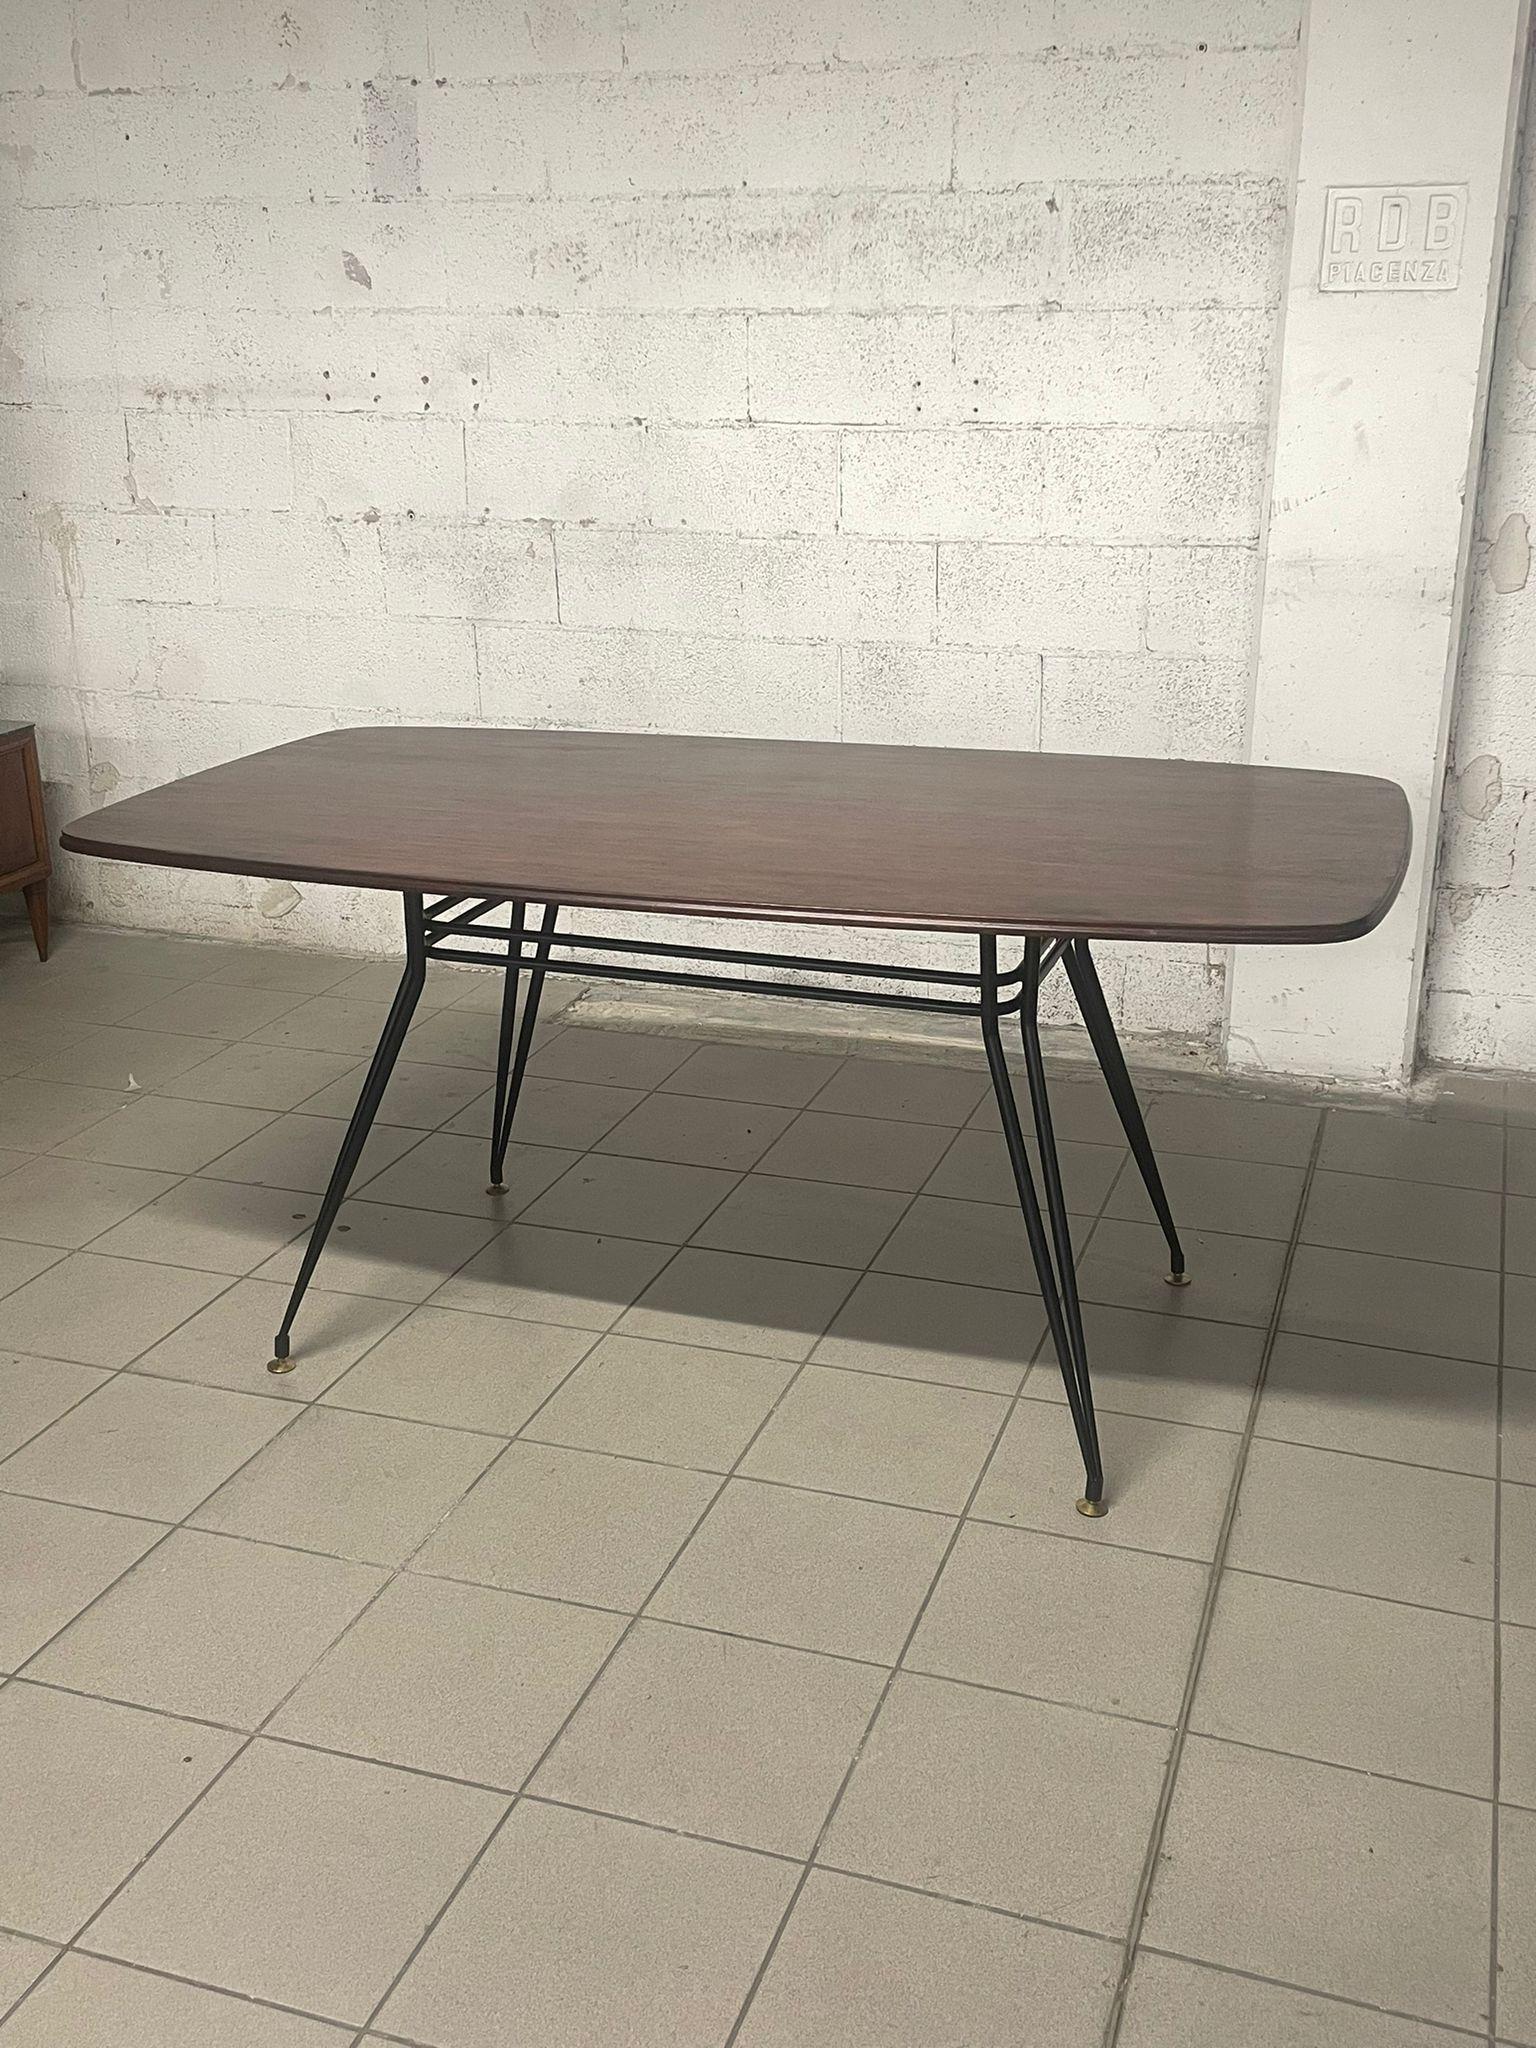 1960s dining table with stained iron frame and rosewood top.

The brass feet are adjustable in height.
At the seating level, the table can accommodate up to a maximum of 8 people.

The table is in good condition, the top may have some surface marks